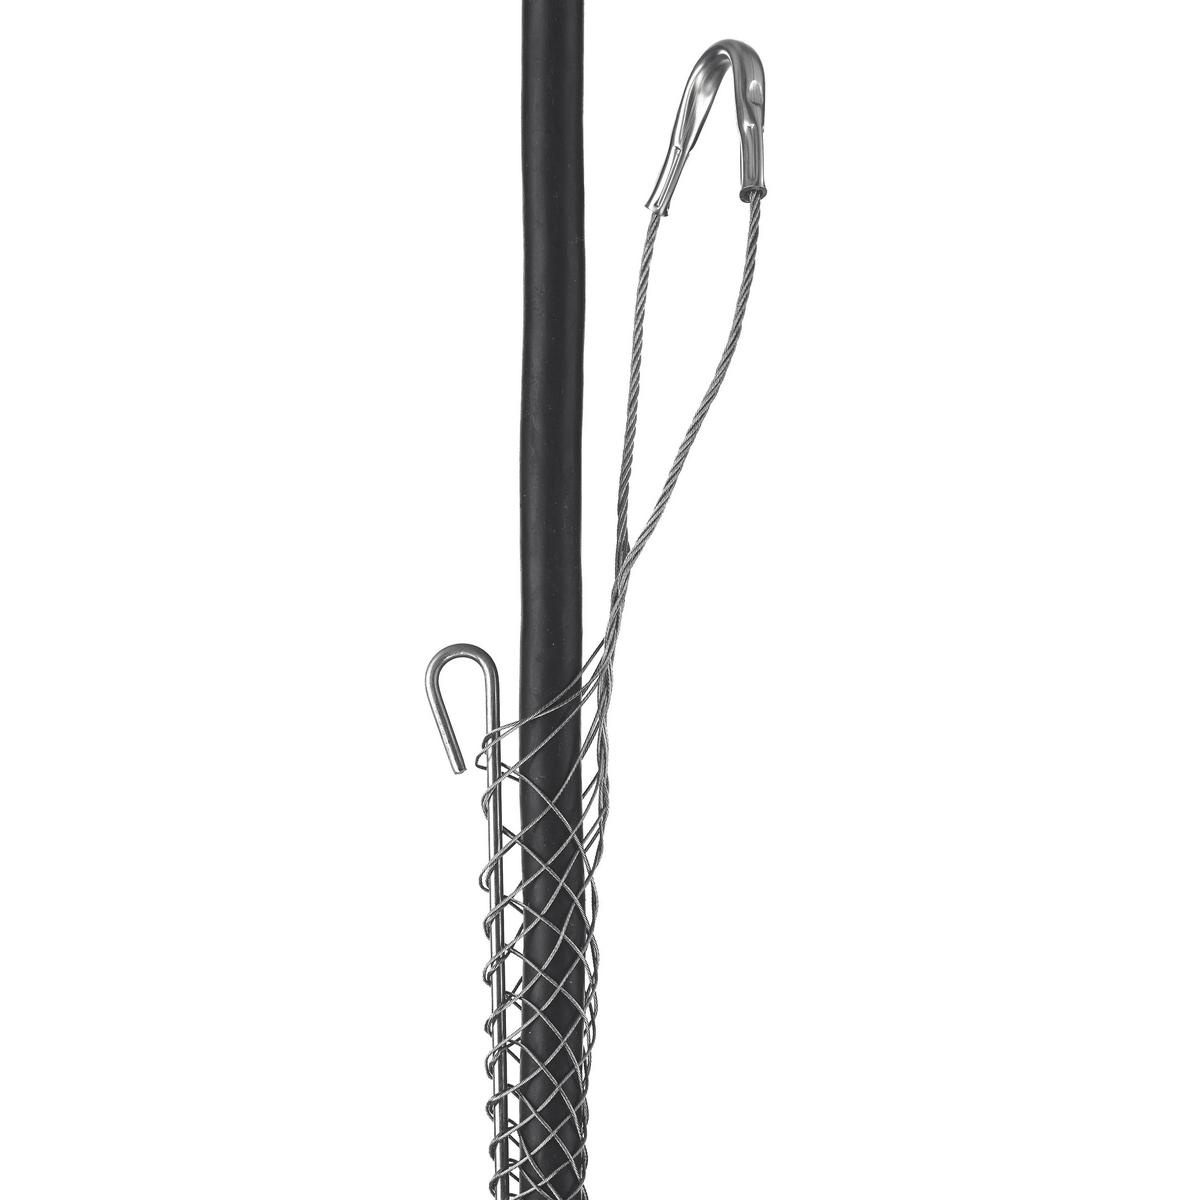 Hubbell 02403047 Support Grips, Offset Eye, Single Weave, Split Mesh, Rod Closing, Stainless Steel, 3.00-3.49"  ; Offset eye ; Strand equalizers position wires for equal loading throughout grip length ; Eye assemblies provide eye reinforcement at support hardware